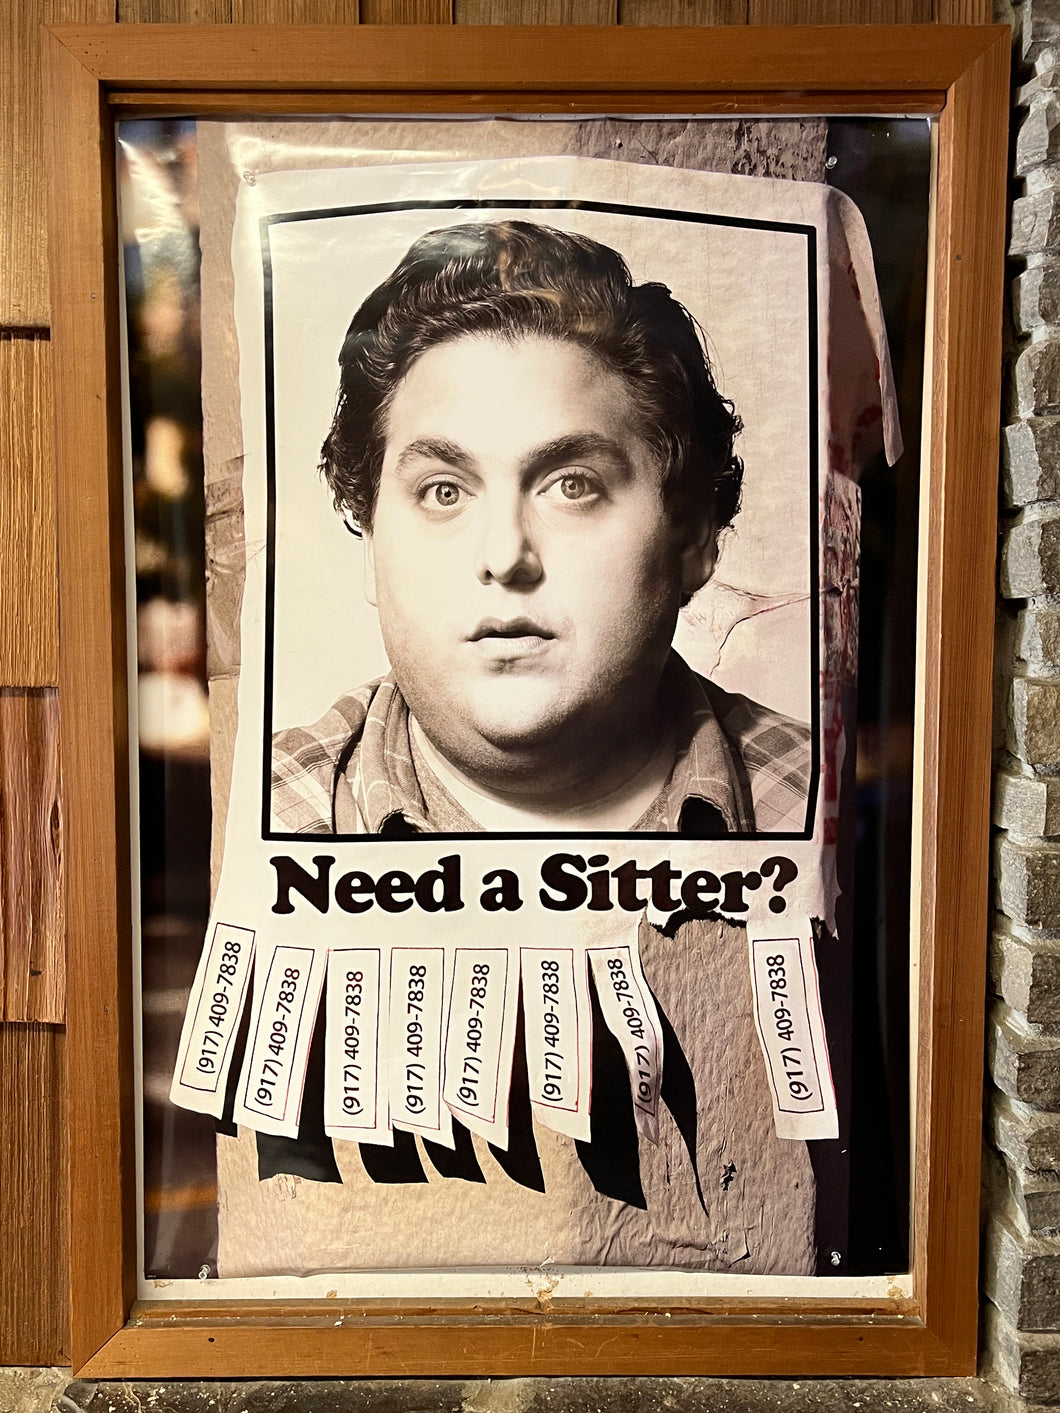 Sitter, The (2009)